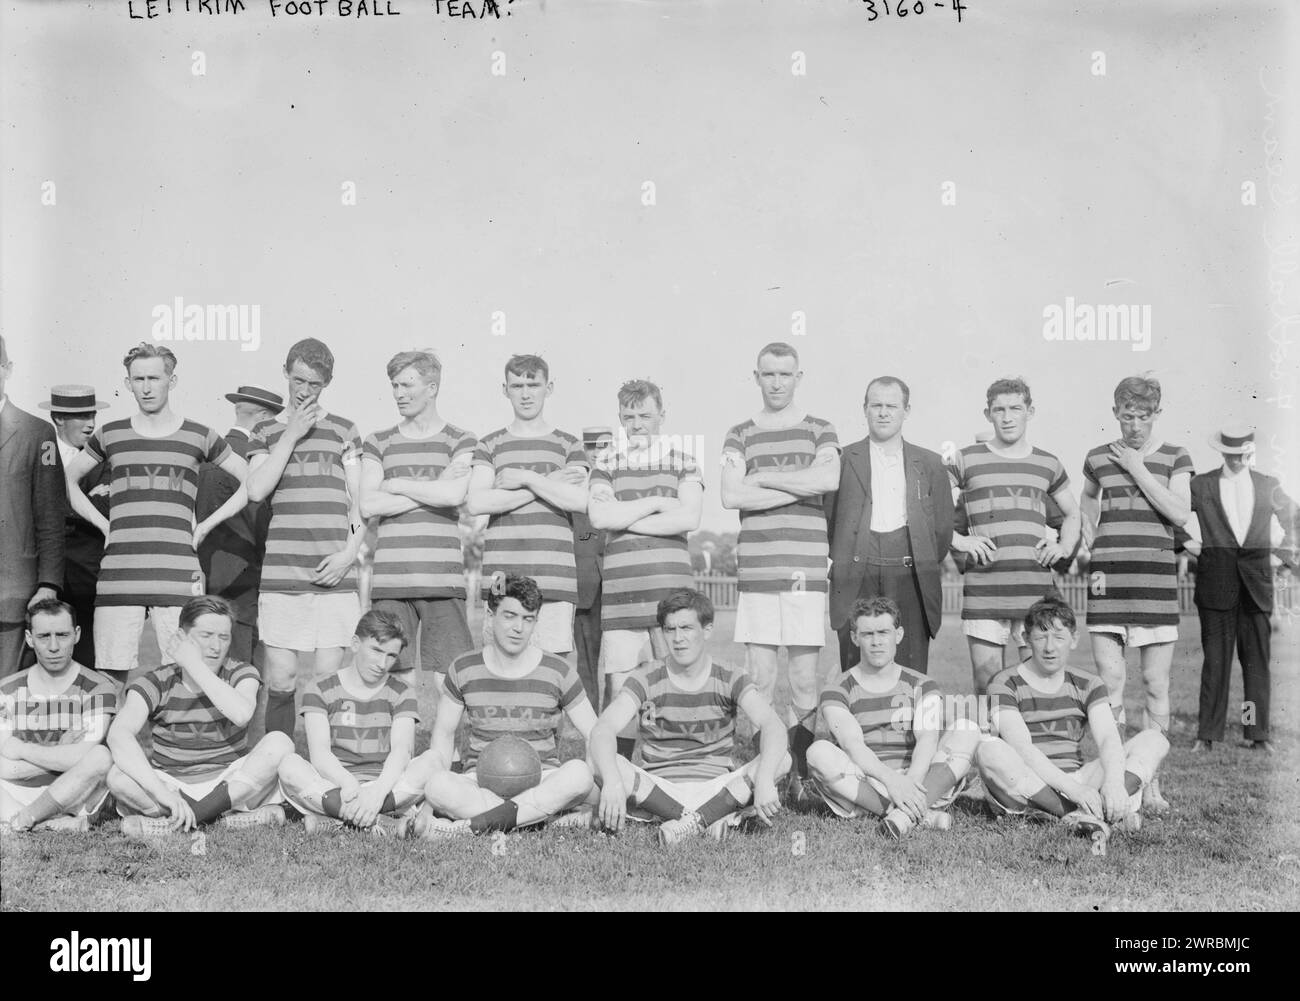 Leitrim football team, Photograph shows the Leitrim football team which played a match of Gaelic football against the Cavan team, in Celtic Park, Queens on July 26, 1914, as part of the 15th annual games of Local 20, International Union of Steam & Operating Engines., 1914 July 26, Glass negatives, 1 negative: glass Stock Photo